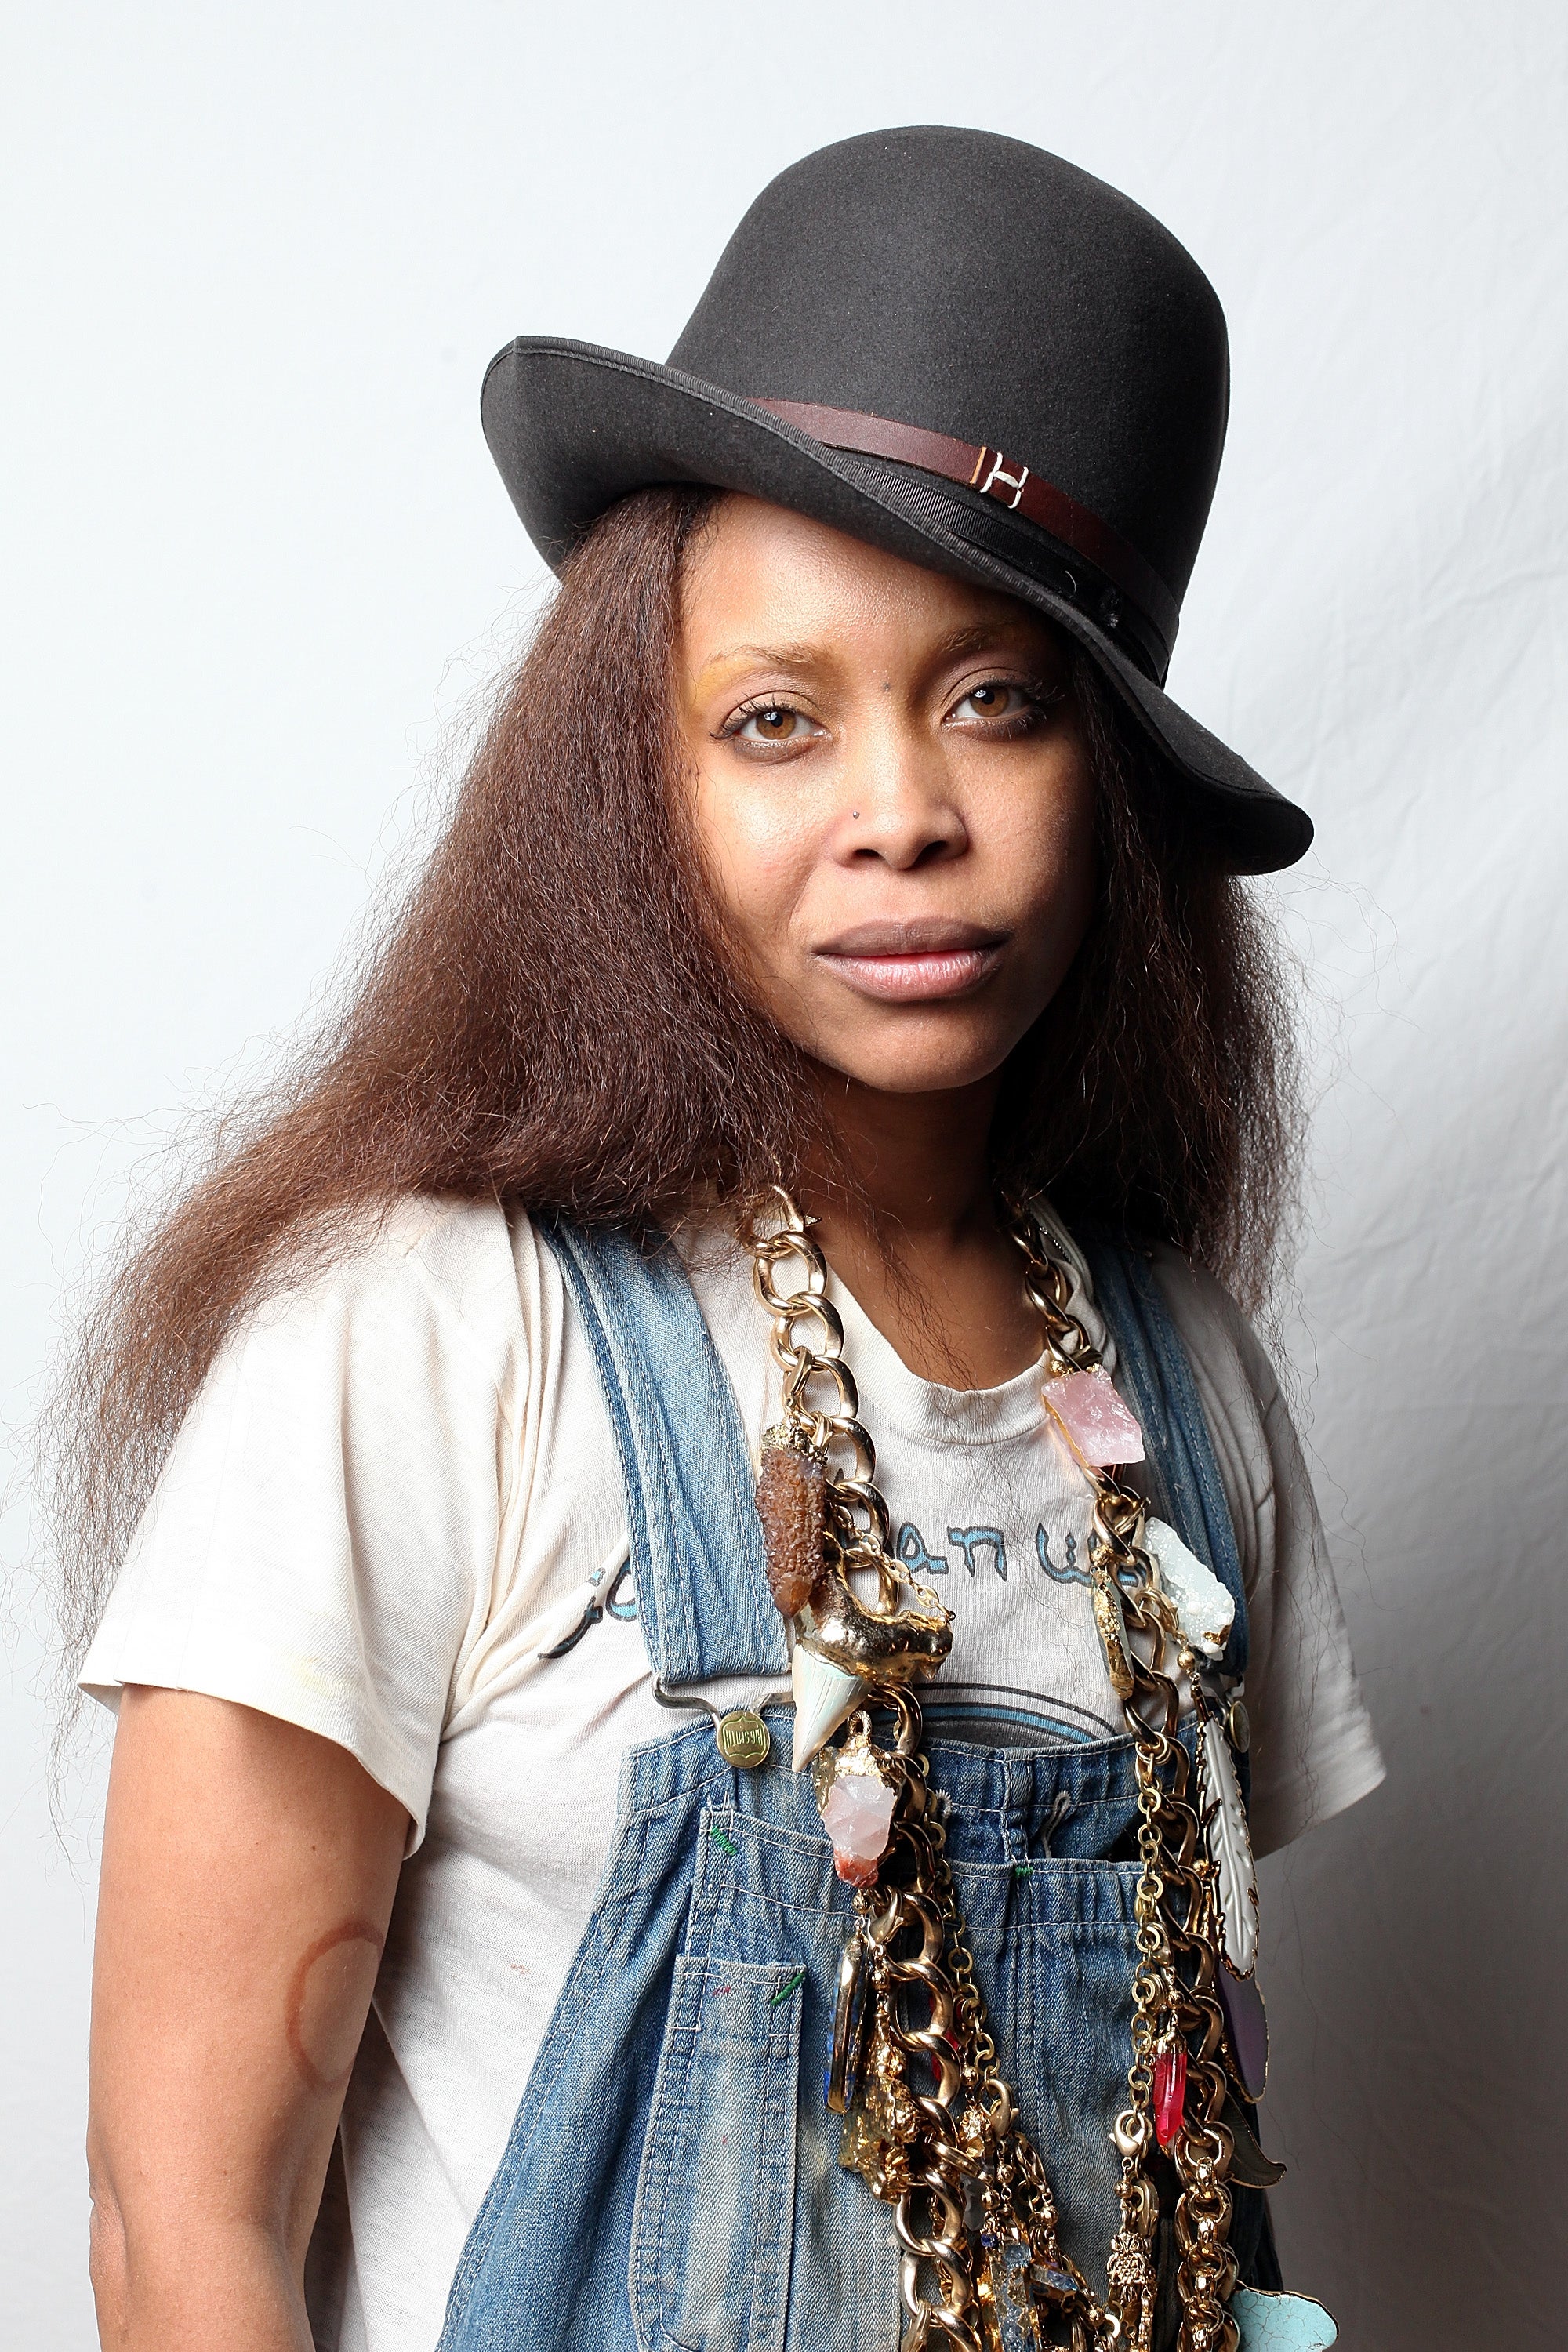 Erykah Badu Embraces Her Body, Why Can't You?